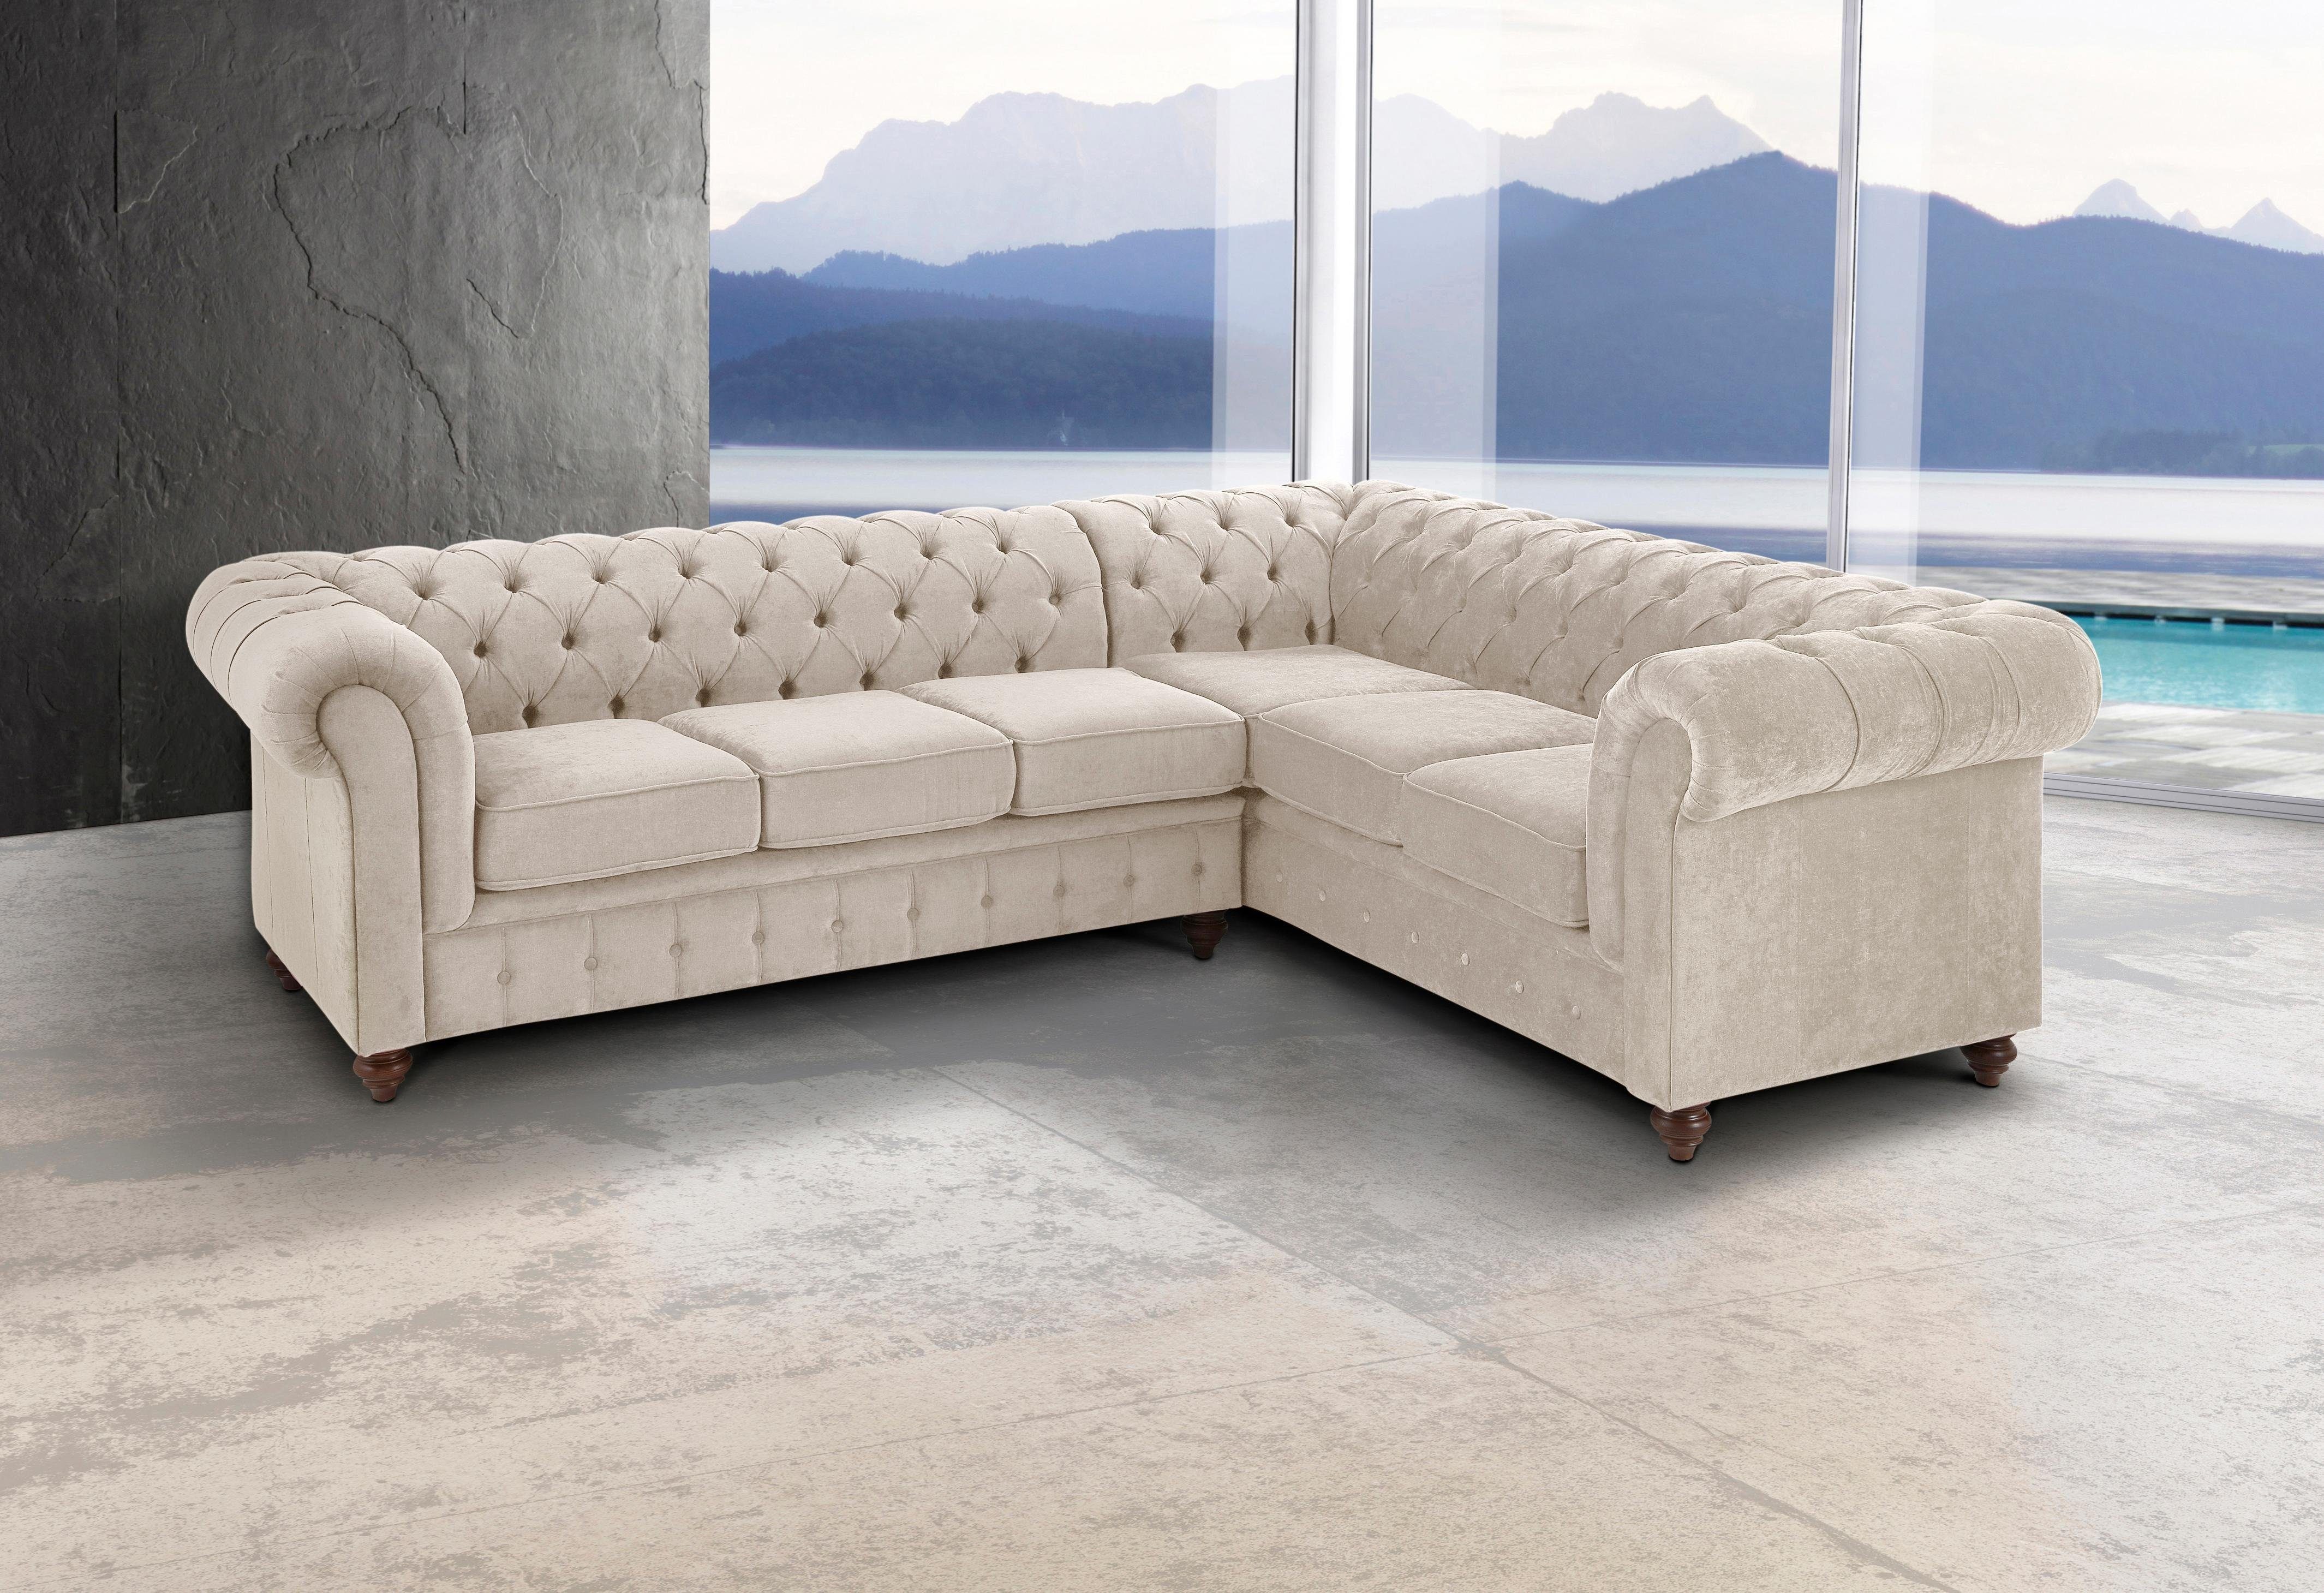 Premium collection by Home affaire Chesterfield-bank CHESTERFIELD met knoopsluiting, ook in leer